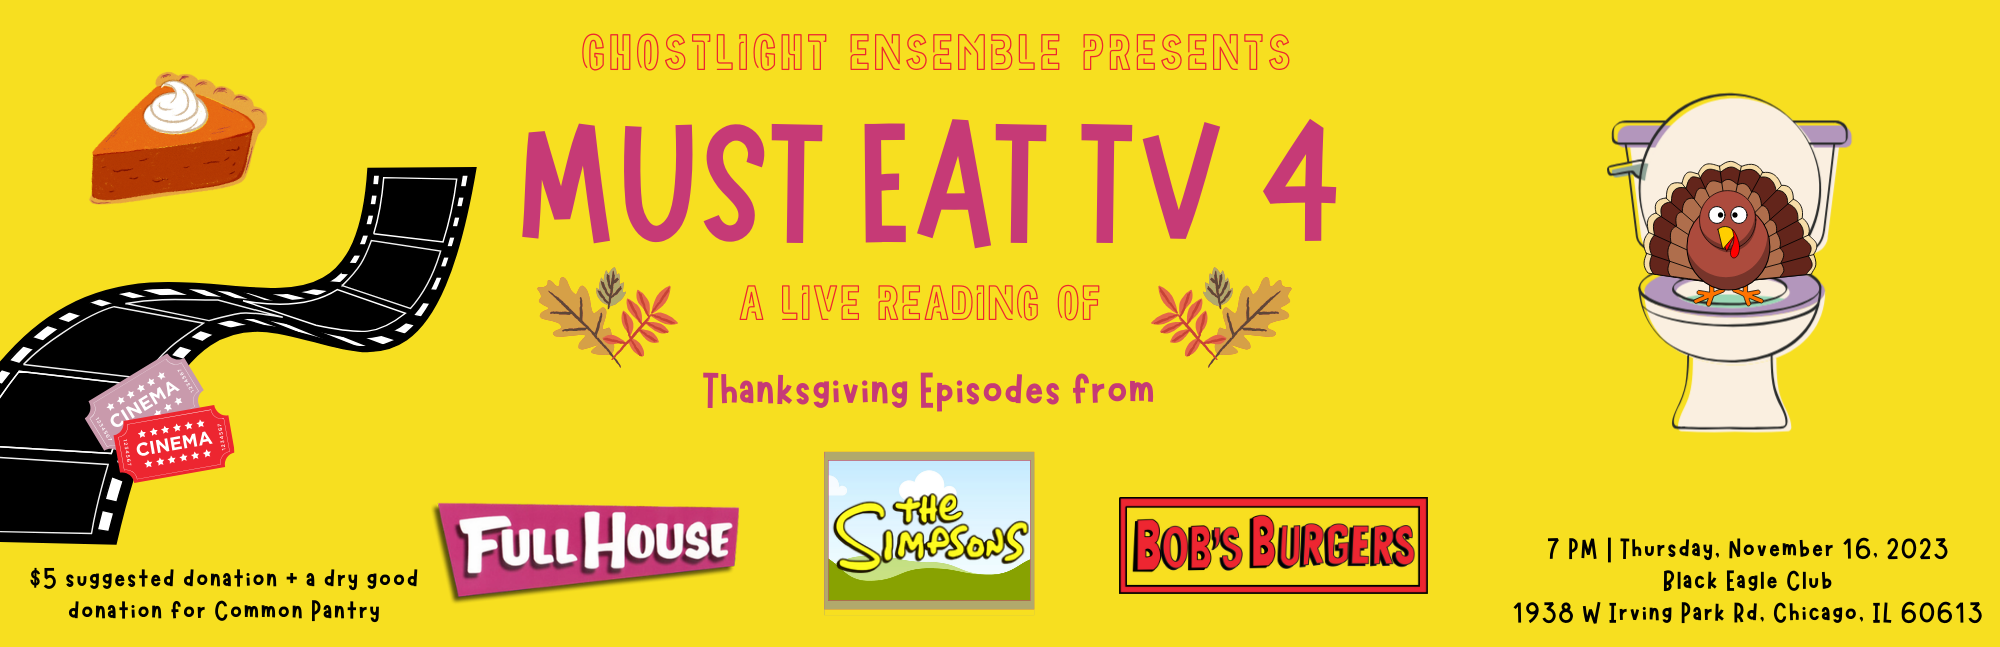 Must Eat TV 4: A Live Reading of Your Favorite Thanksgiving Television Episodes